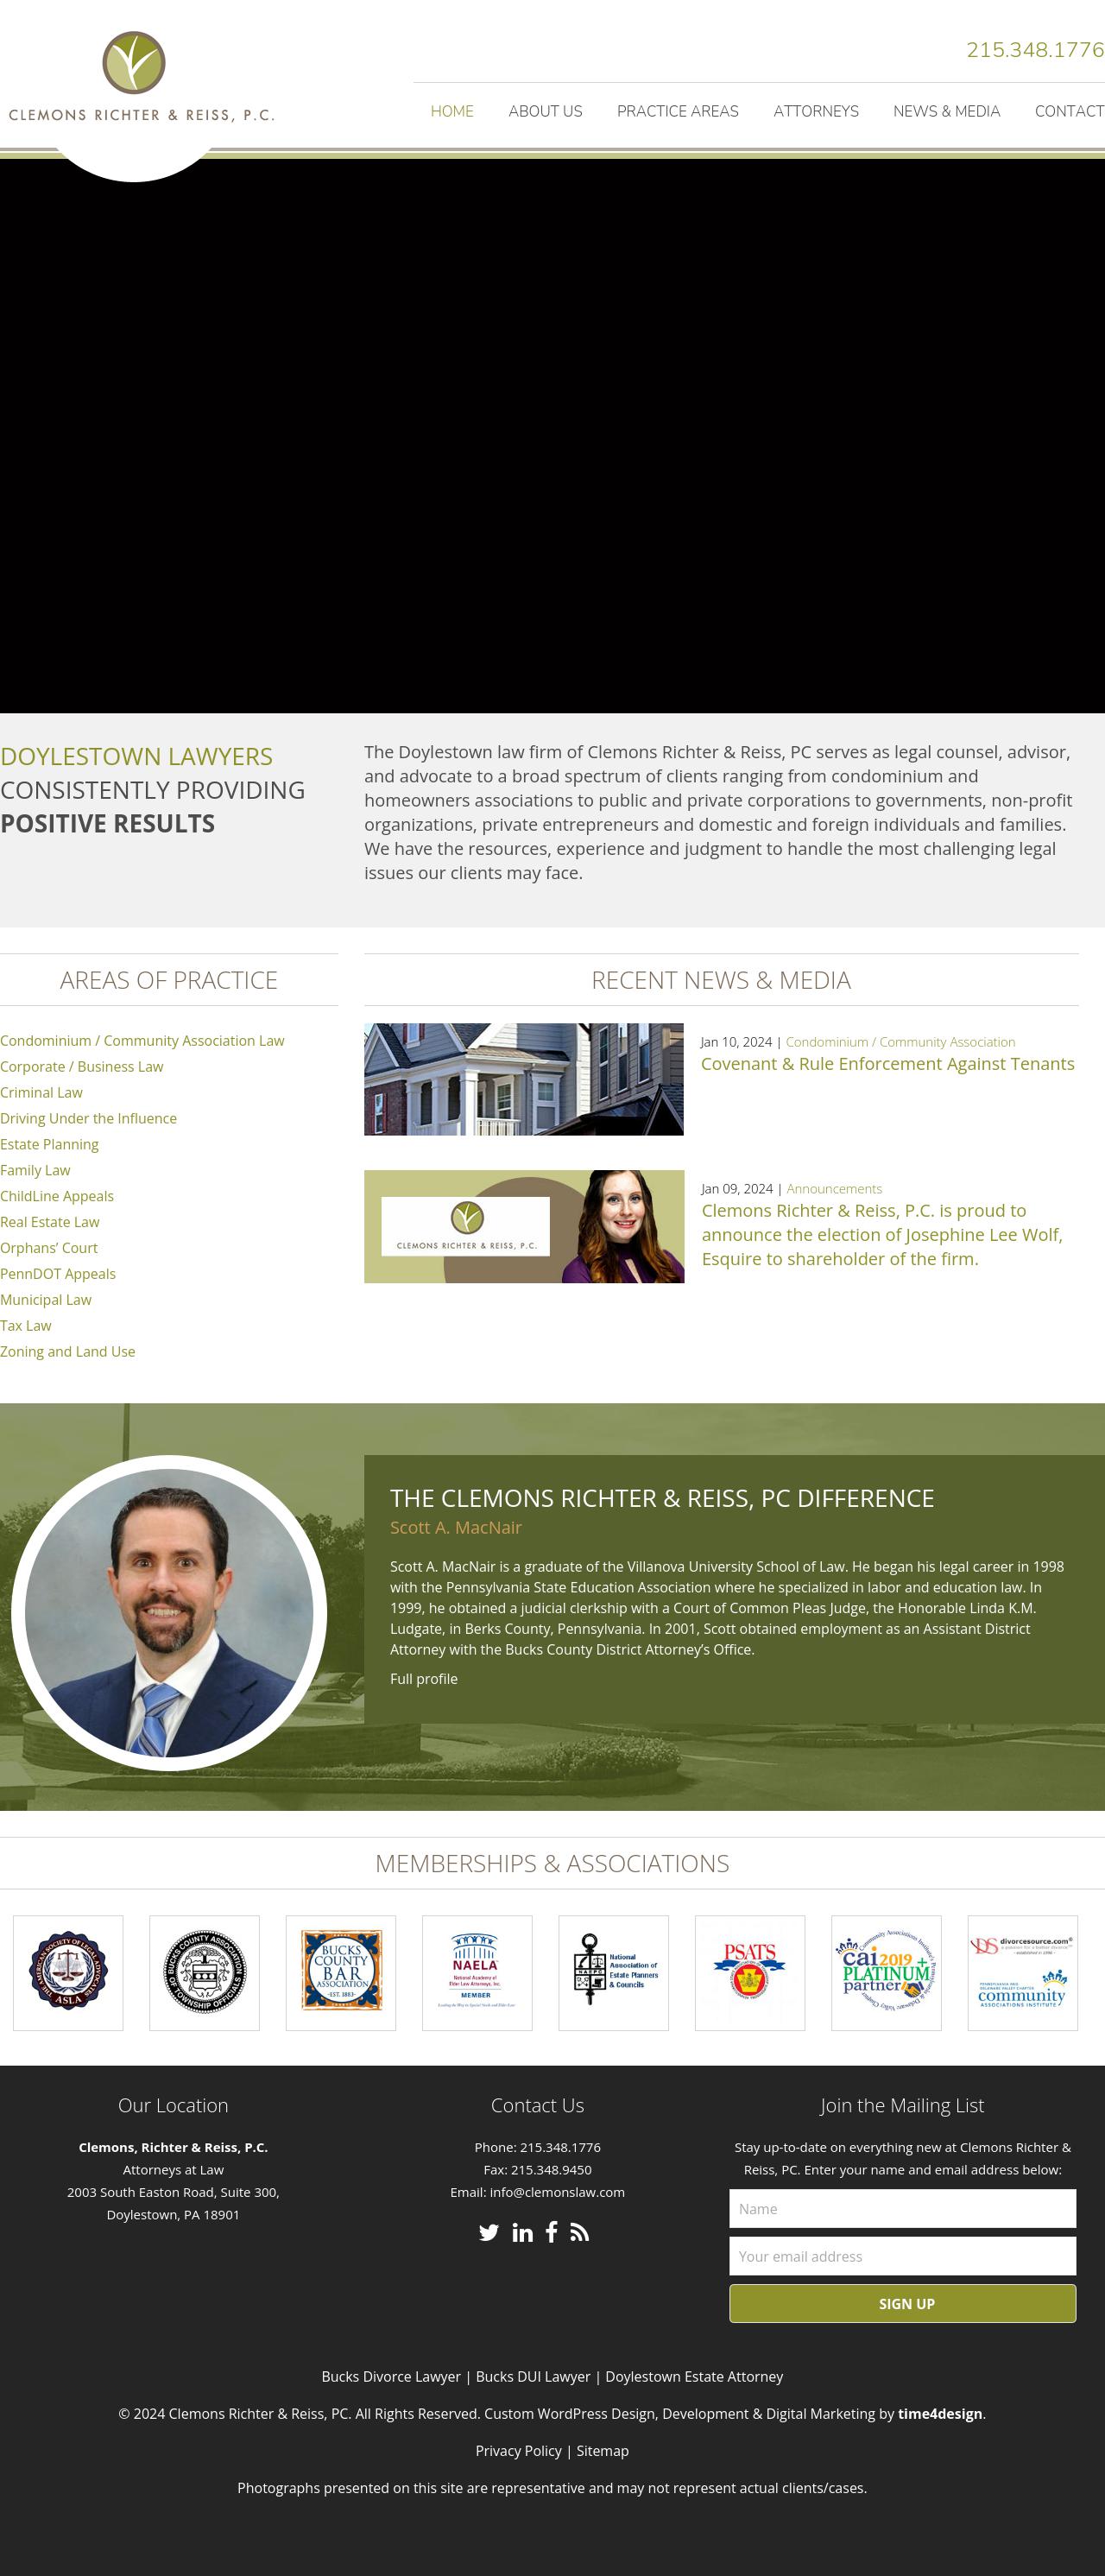 Clemons, Richter & Reiss, P.C. - Lansdale PA Lawyers